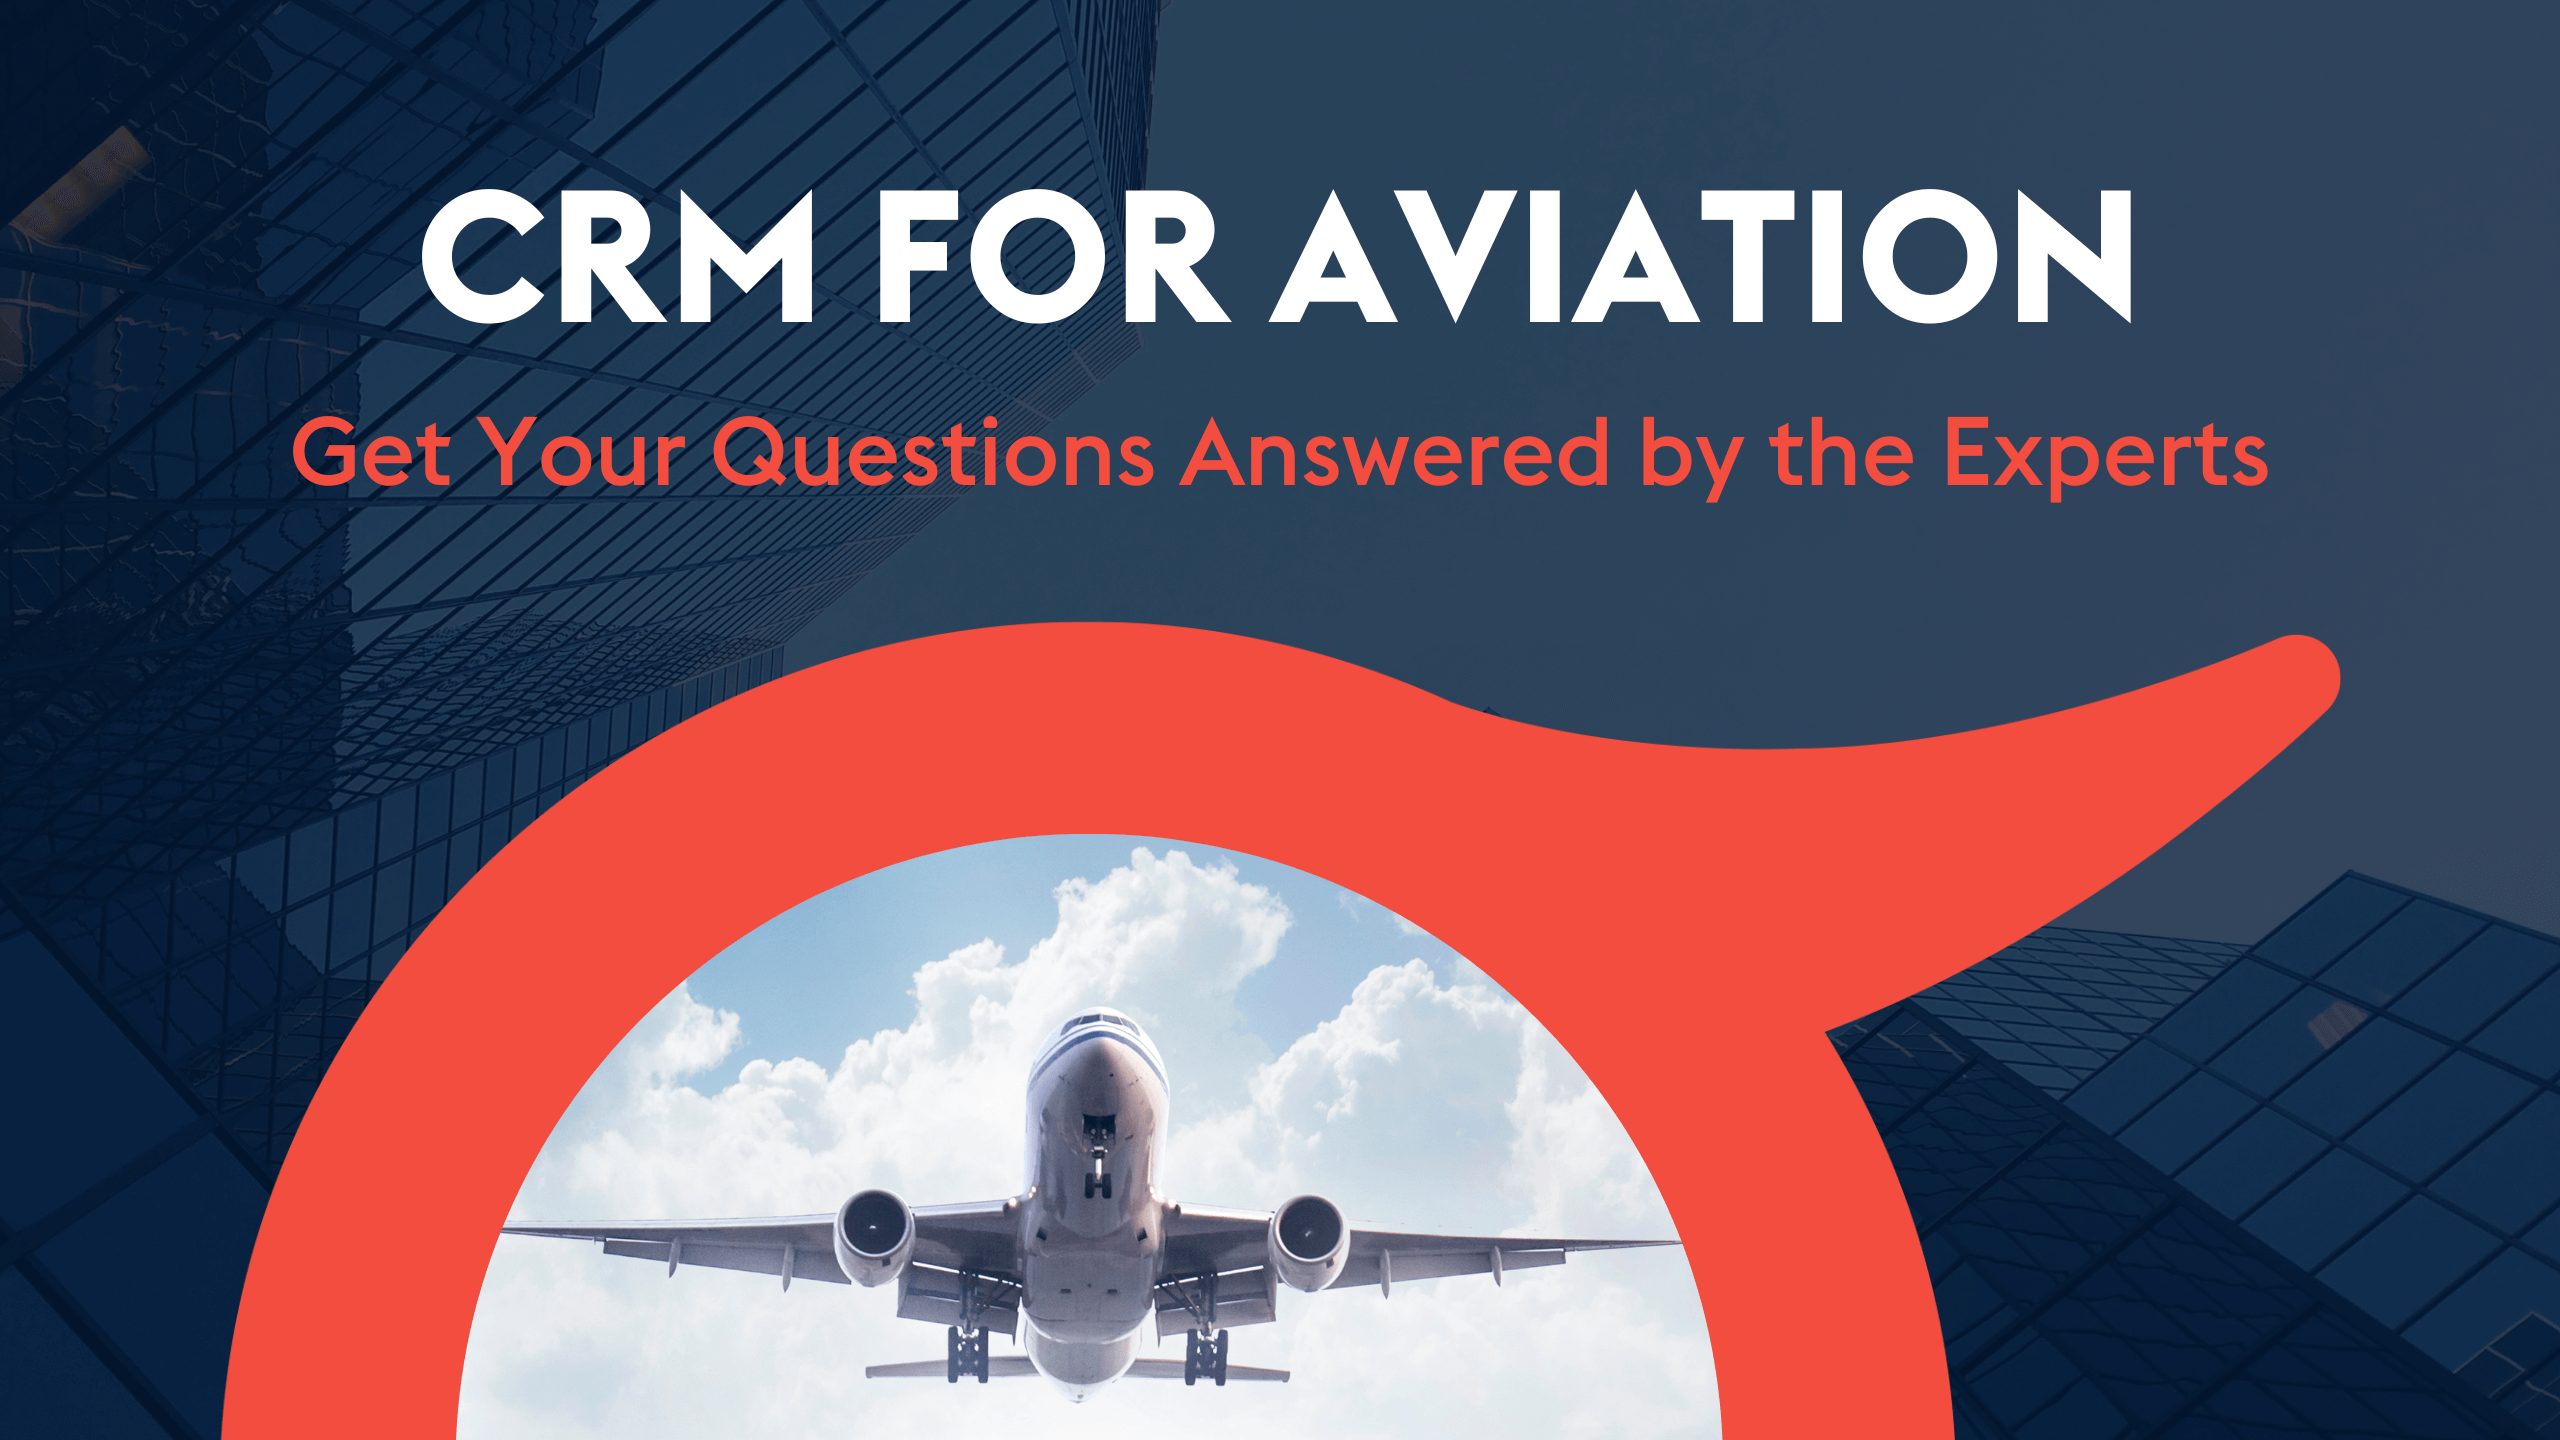 ProvidentCRM-CRM-for-Aviation-Get-Your-Questions-Answered-by-the-Experts